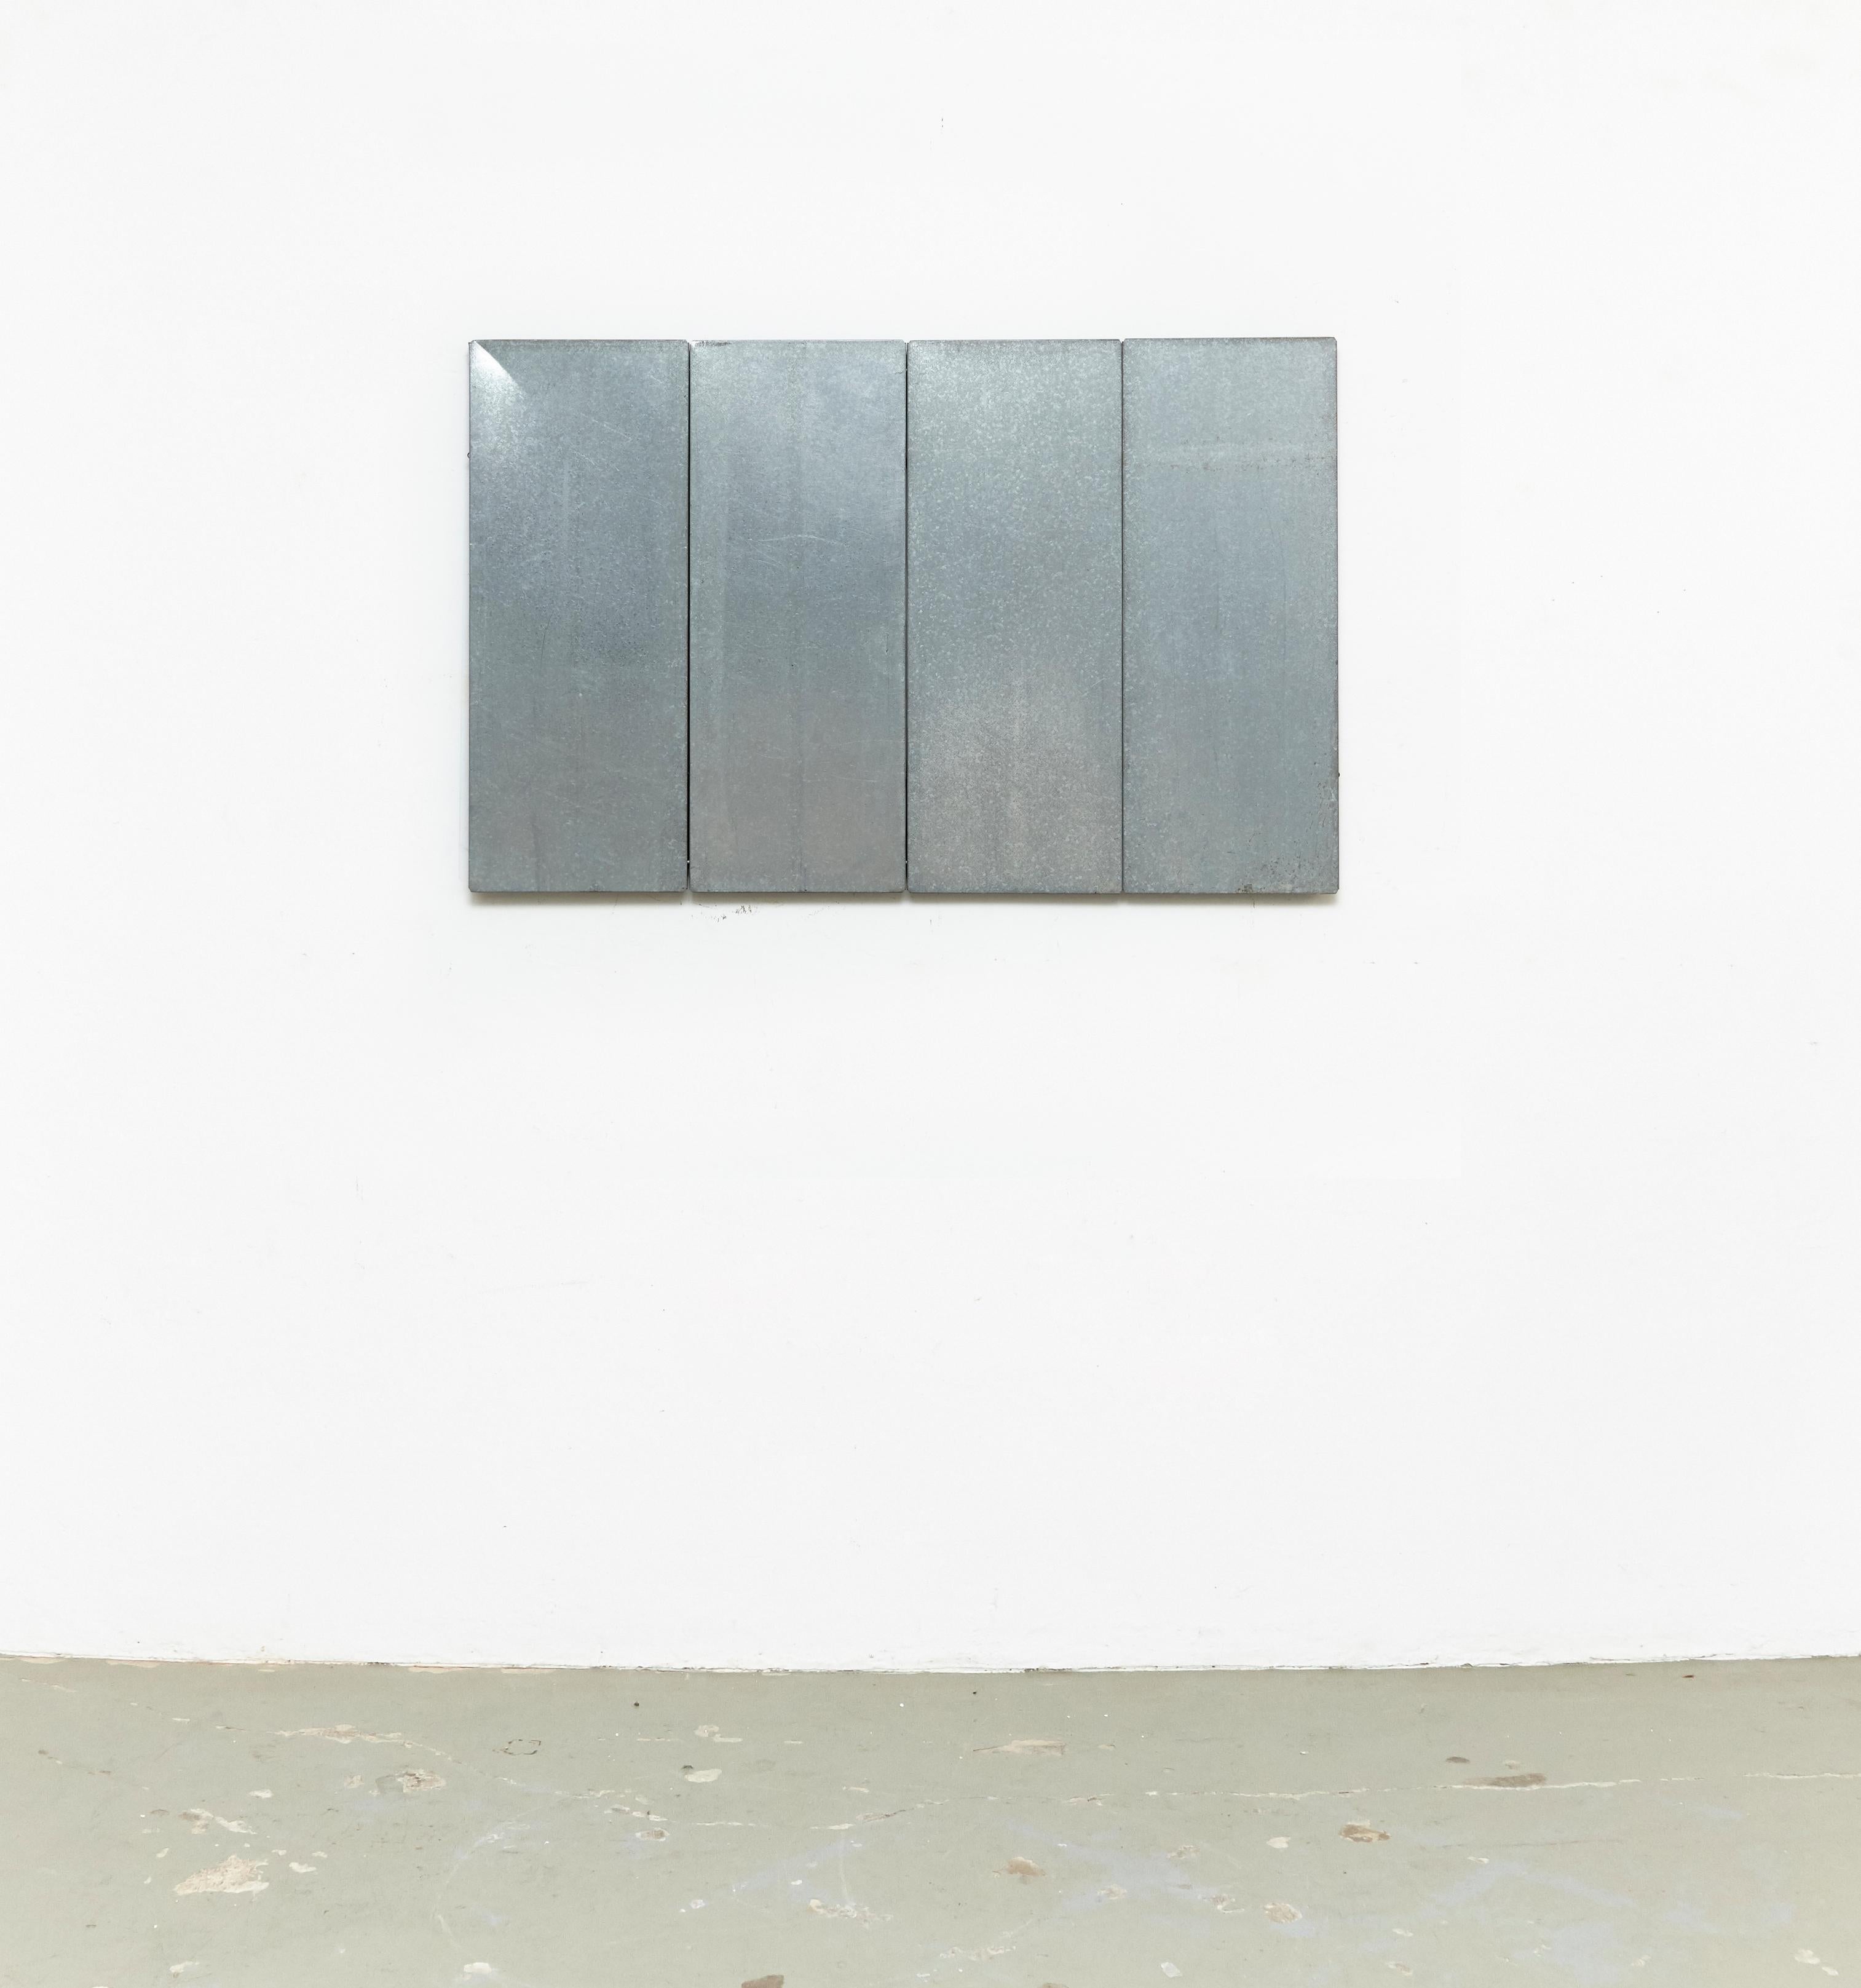 Ramon Horts, Minimalist large artwork.

Structures of metal compositions made in Barcelona, circa 2016. For a solo exhibition.
Signed by himself in engraving punch.

In original condition.

Scraped metal, rusted and varnished.

.